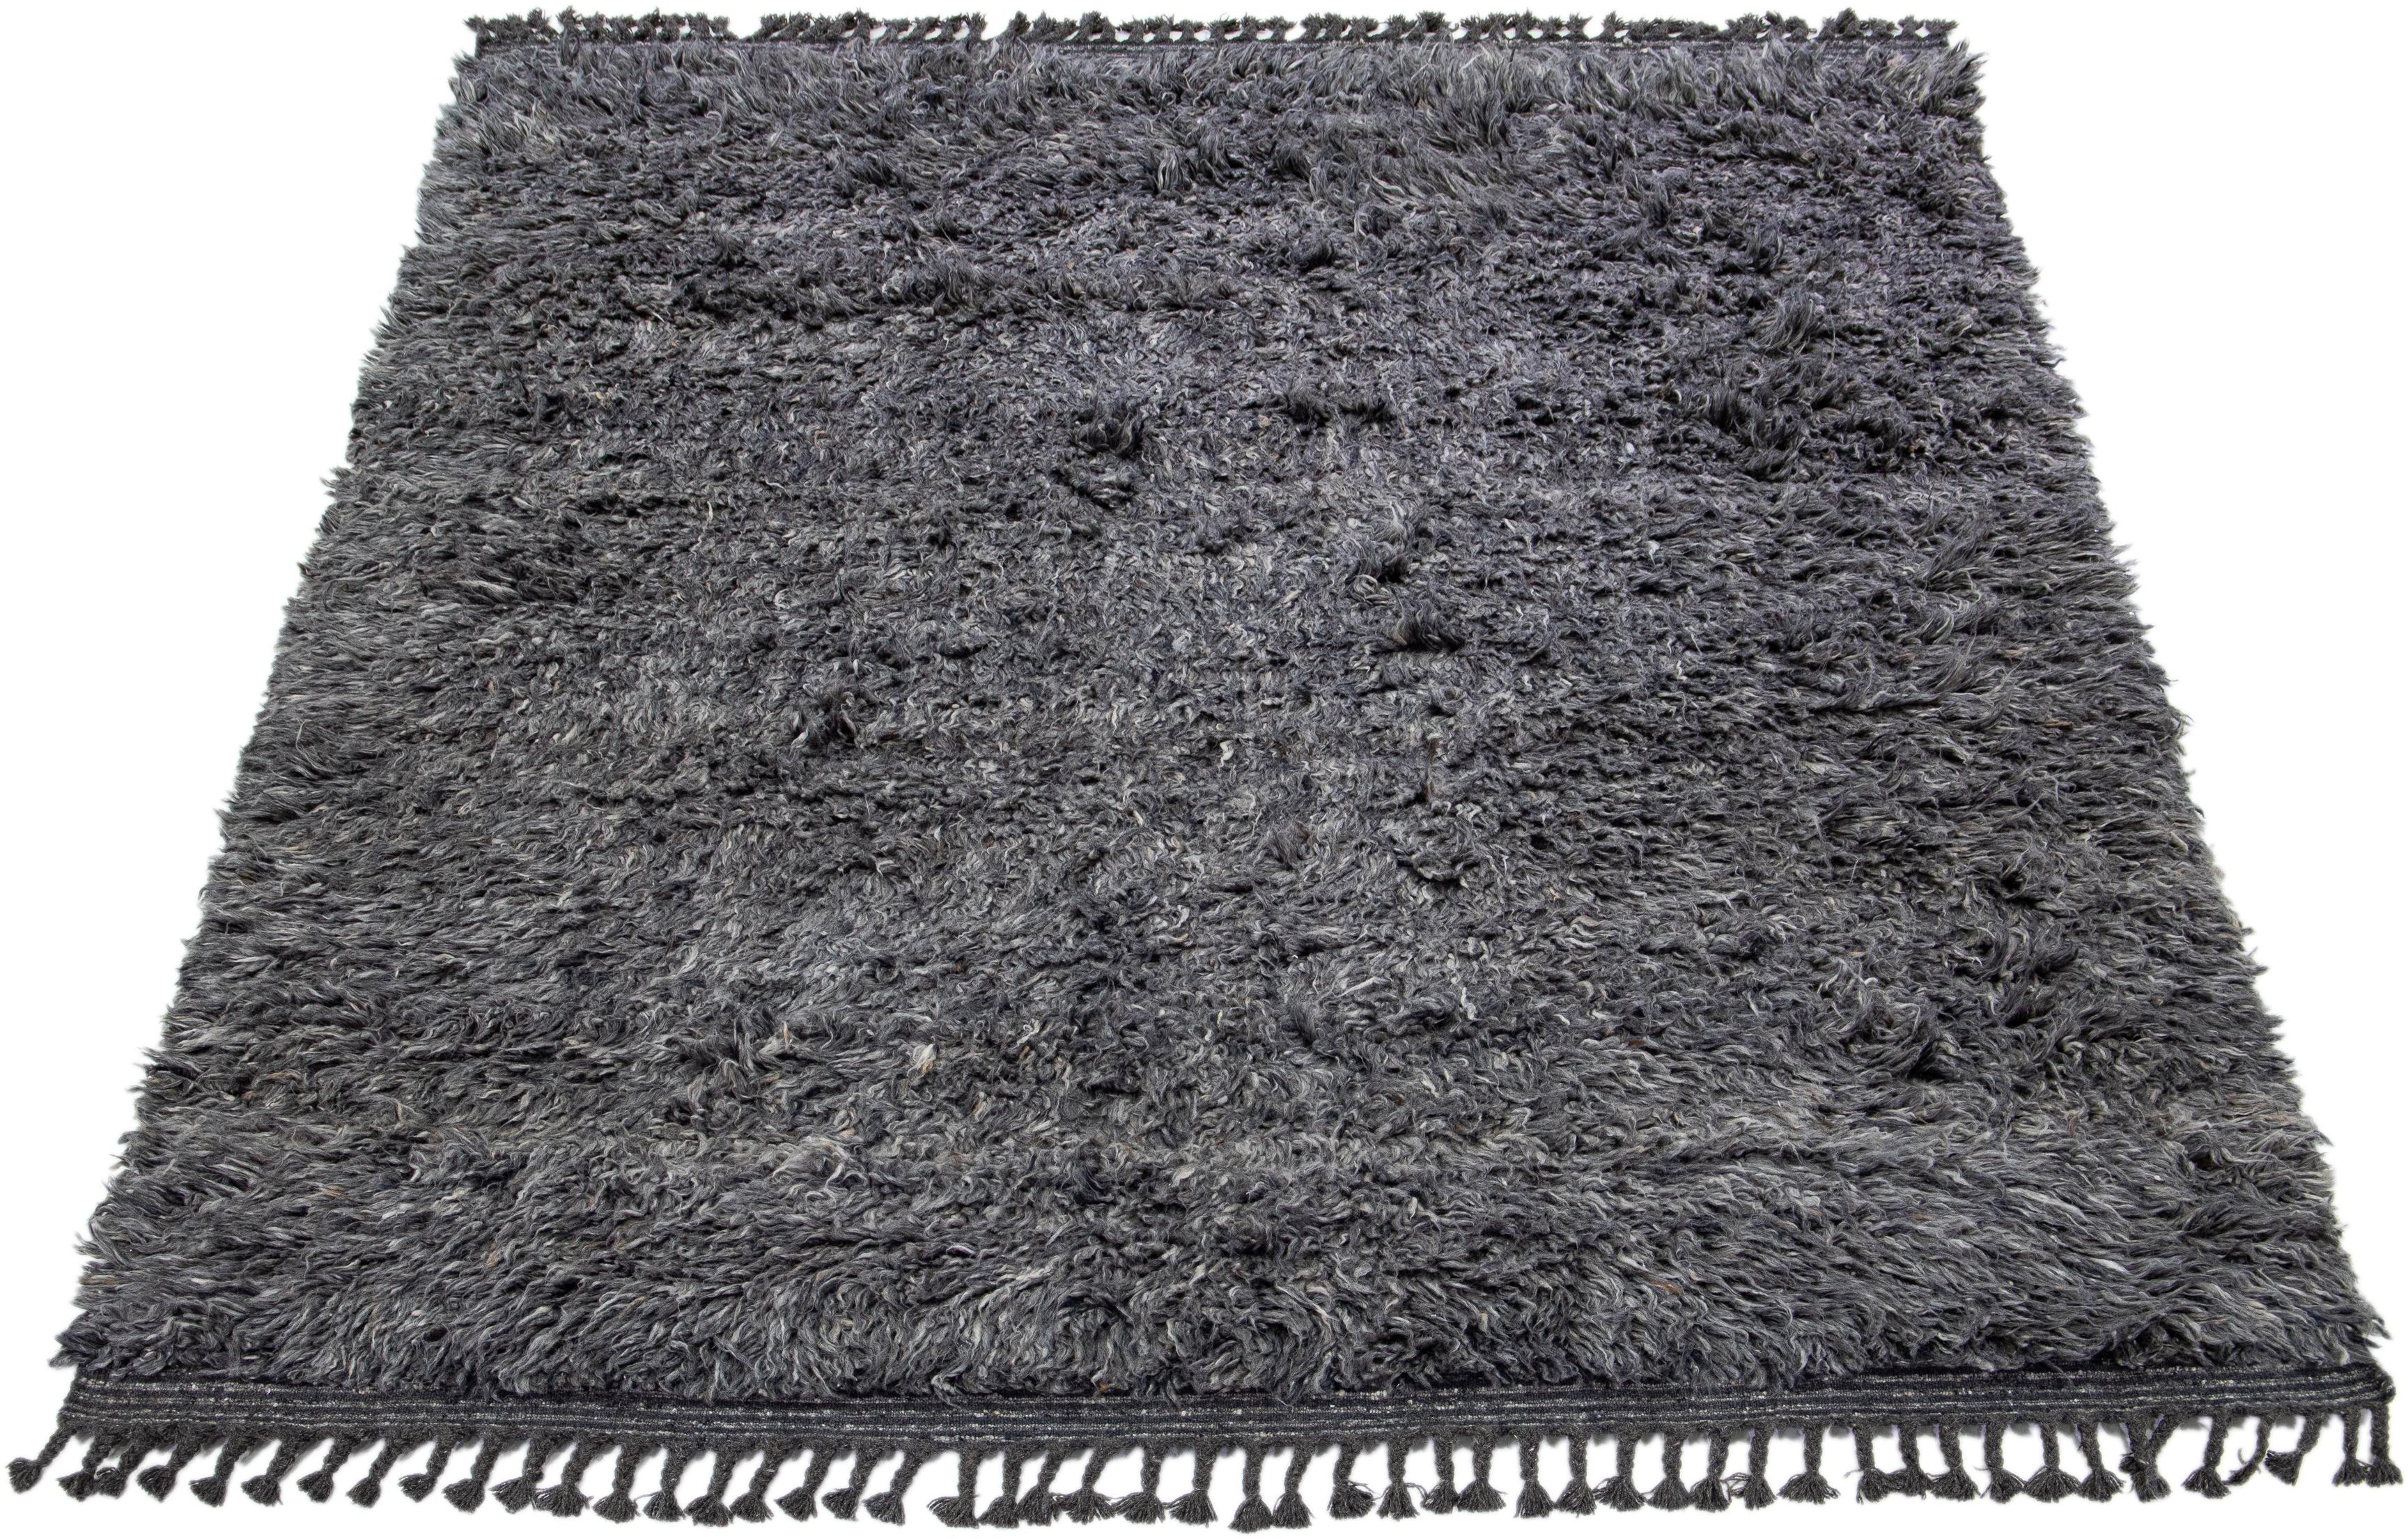 This hand-knotted rug is made from organic wool and has a chic Moroccan style. It showcases an enthralling background in tones of gray and charcoal.

This rug measures 8'2' x 10'3